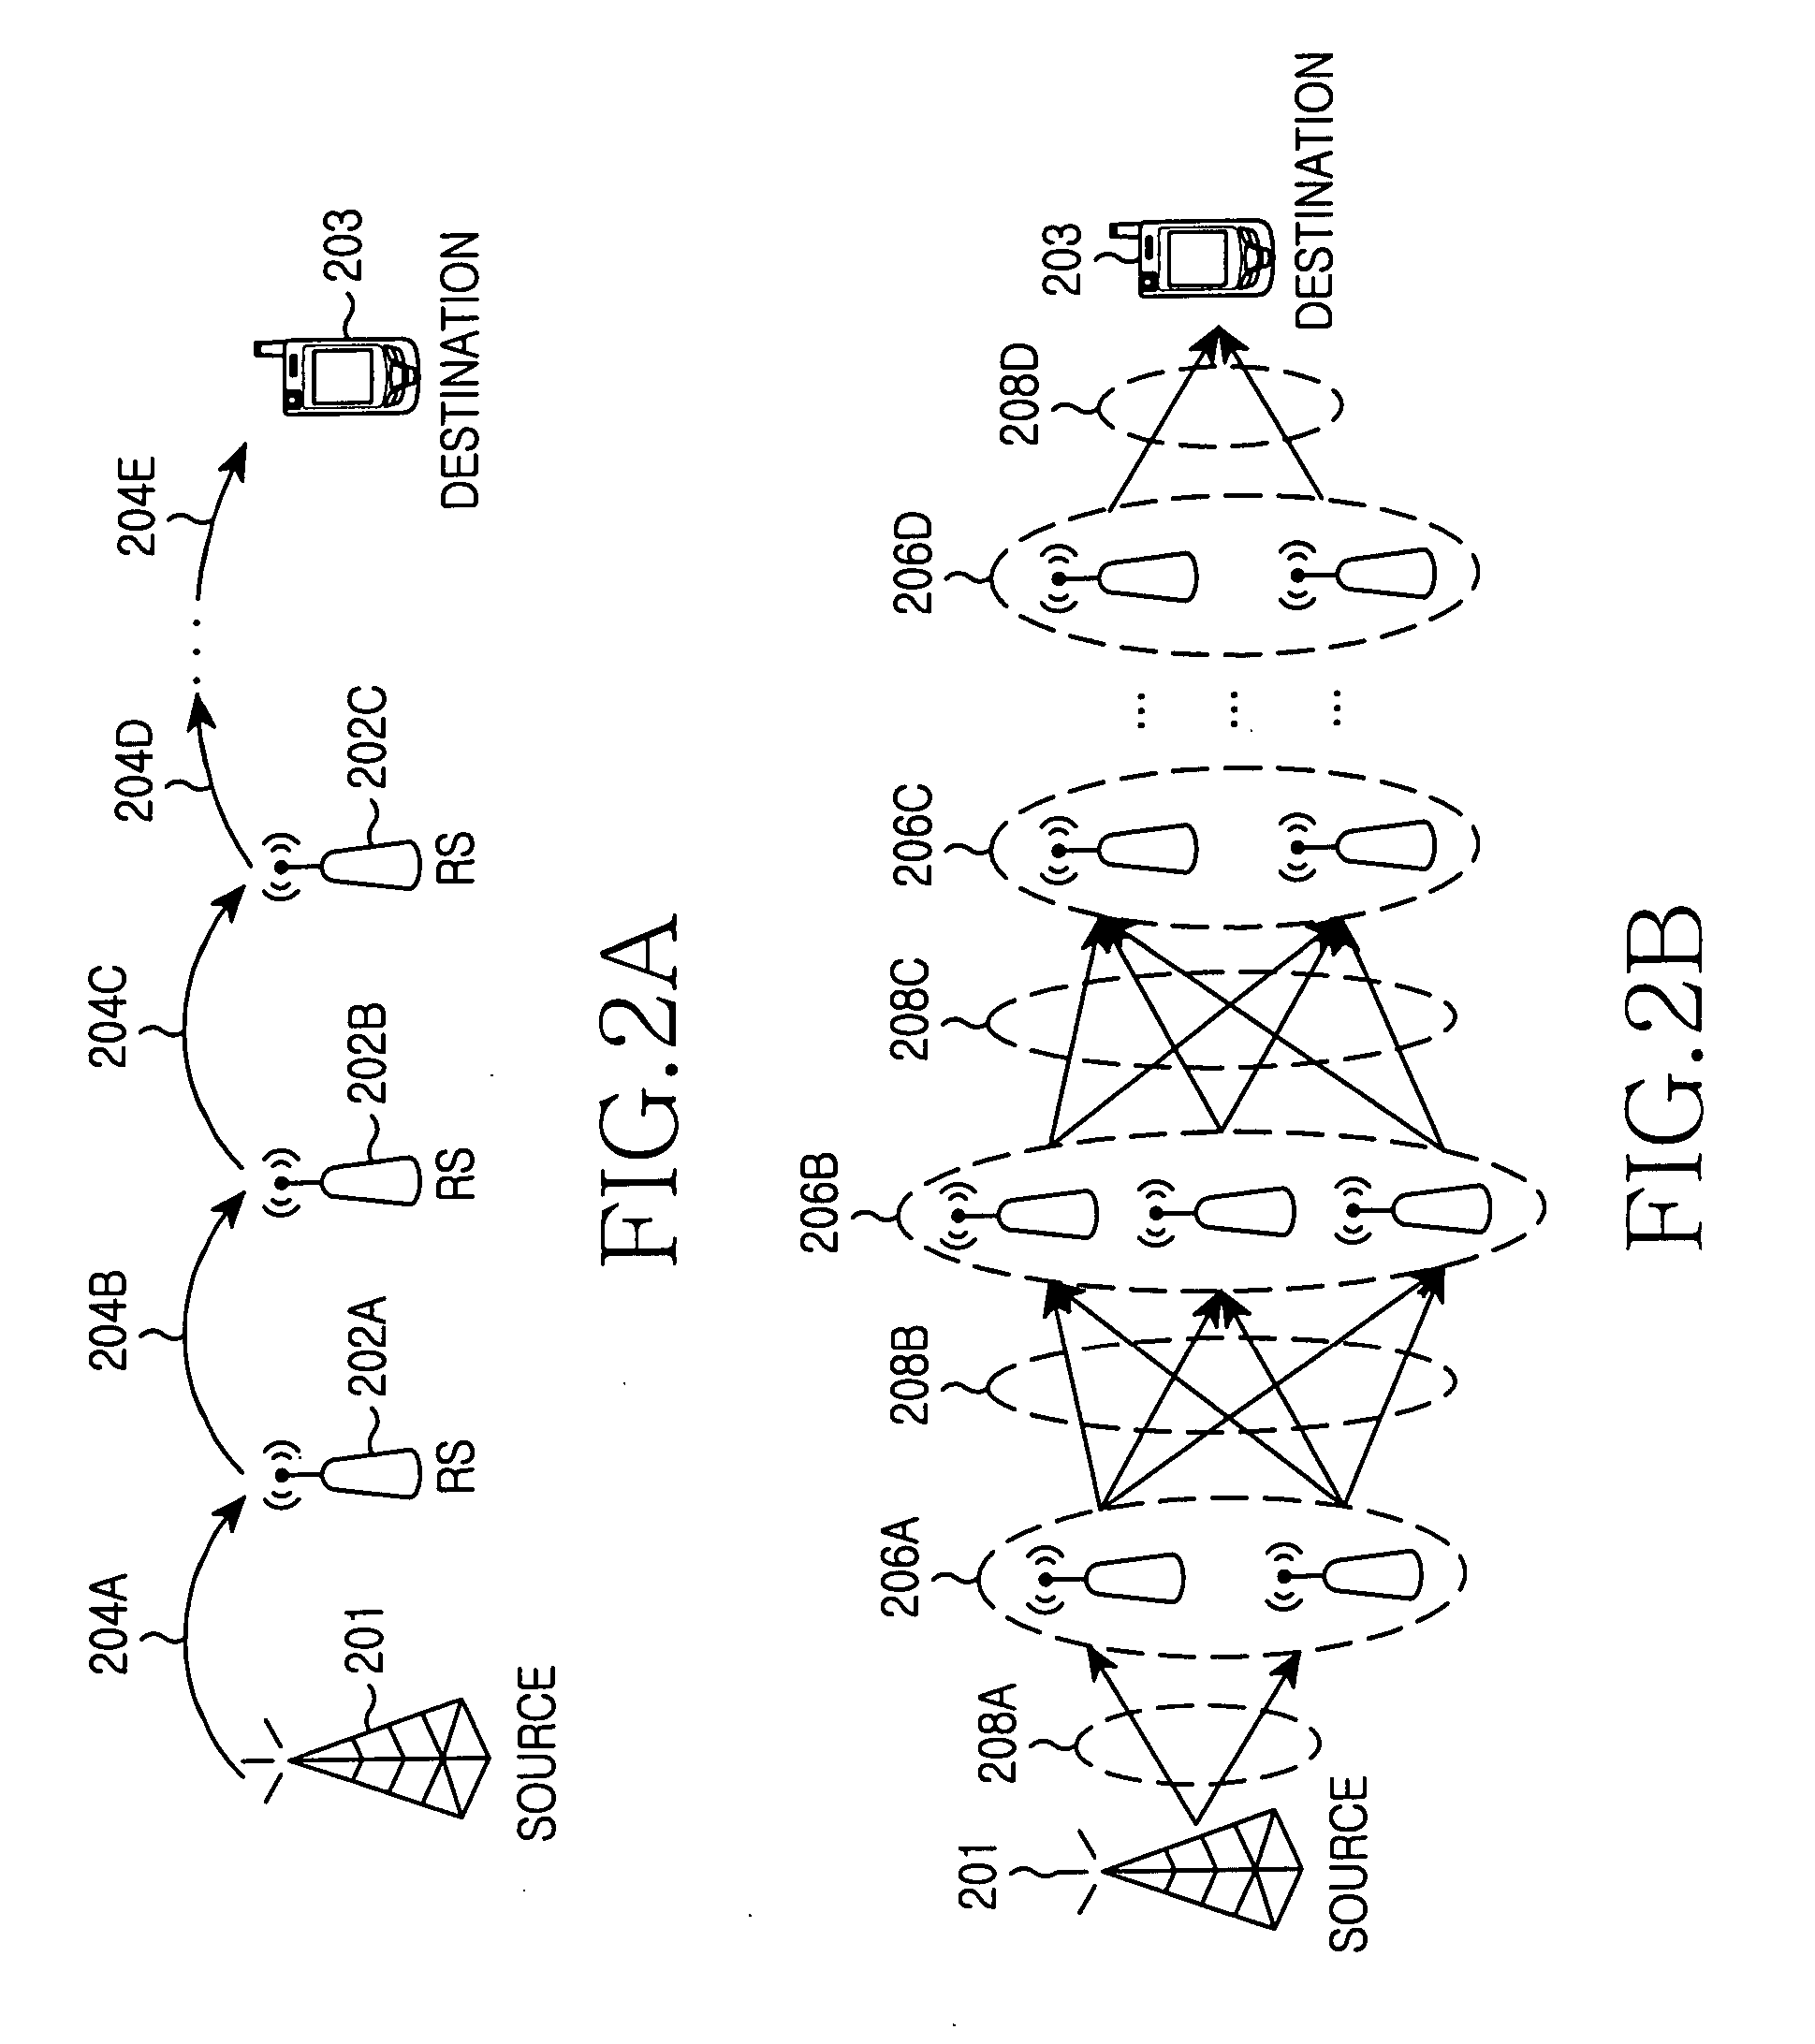 Apparatus and method for providing relay service in an OFDM mobile communication system